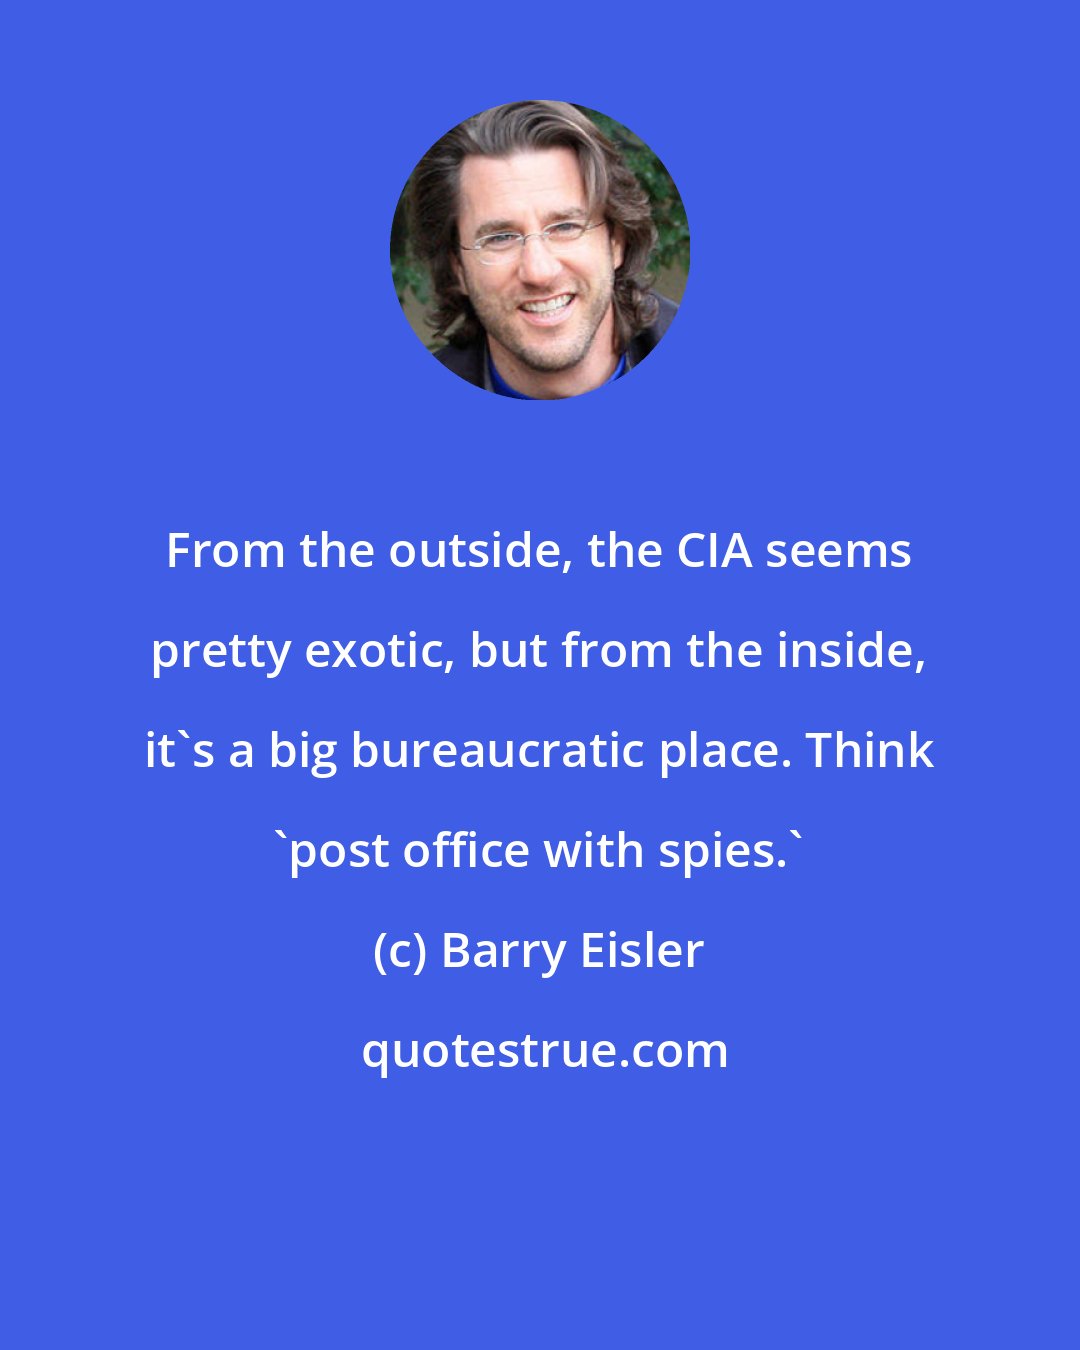 Barry Eisler: From the outside, the CIA seems pretty exotic, but from the inside, it's a big bureaucratic place. Think 'post office with spies.'